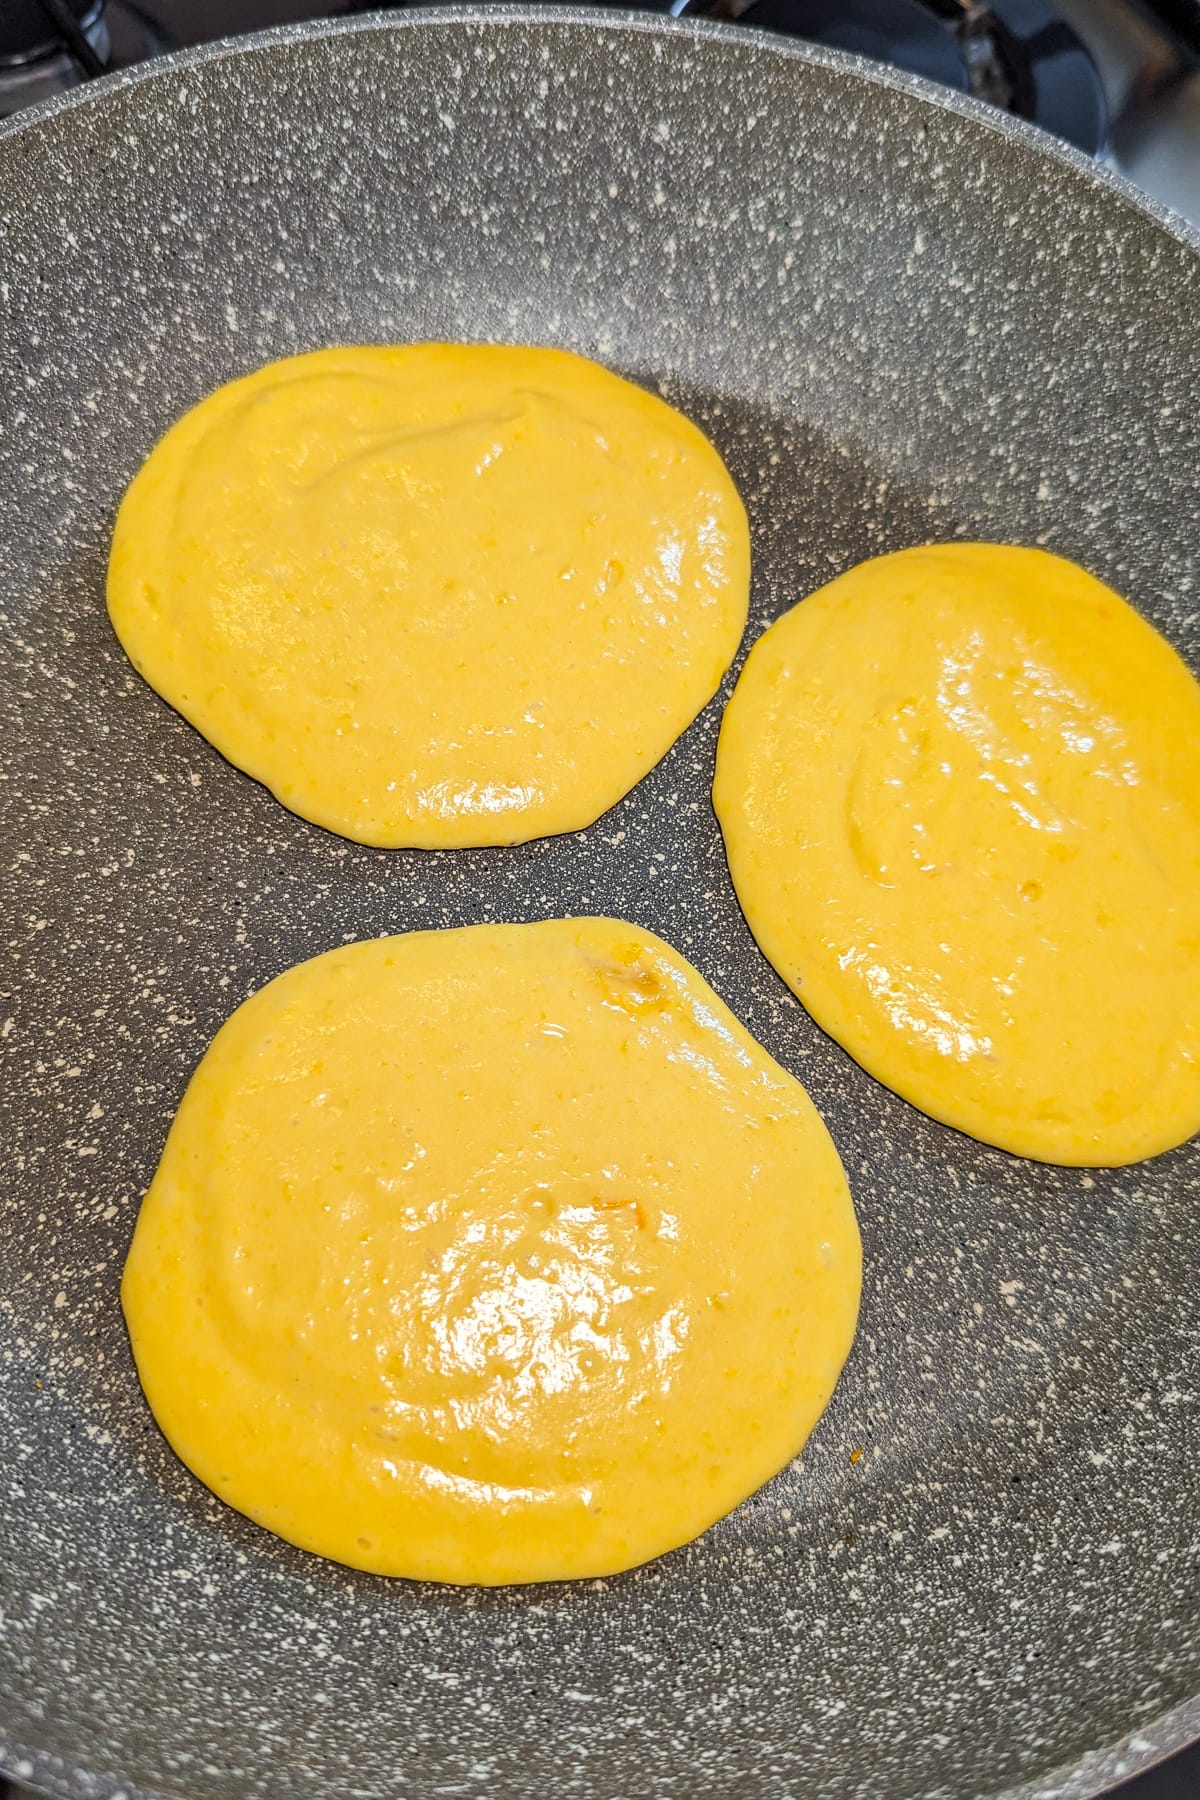 Top view of 3 pumpkin pancakes in a frying pan on the stove.